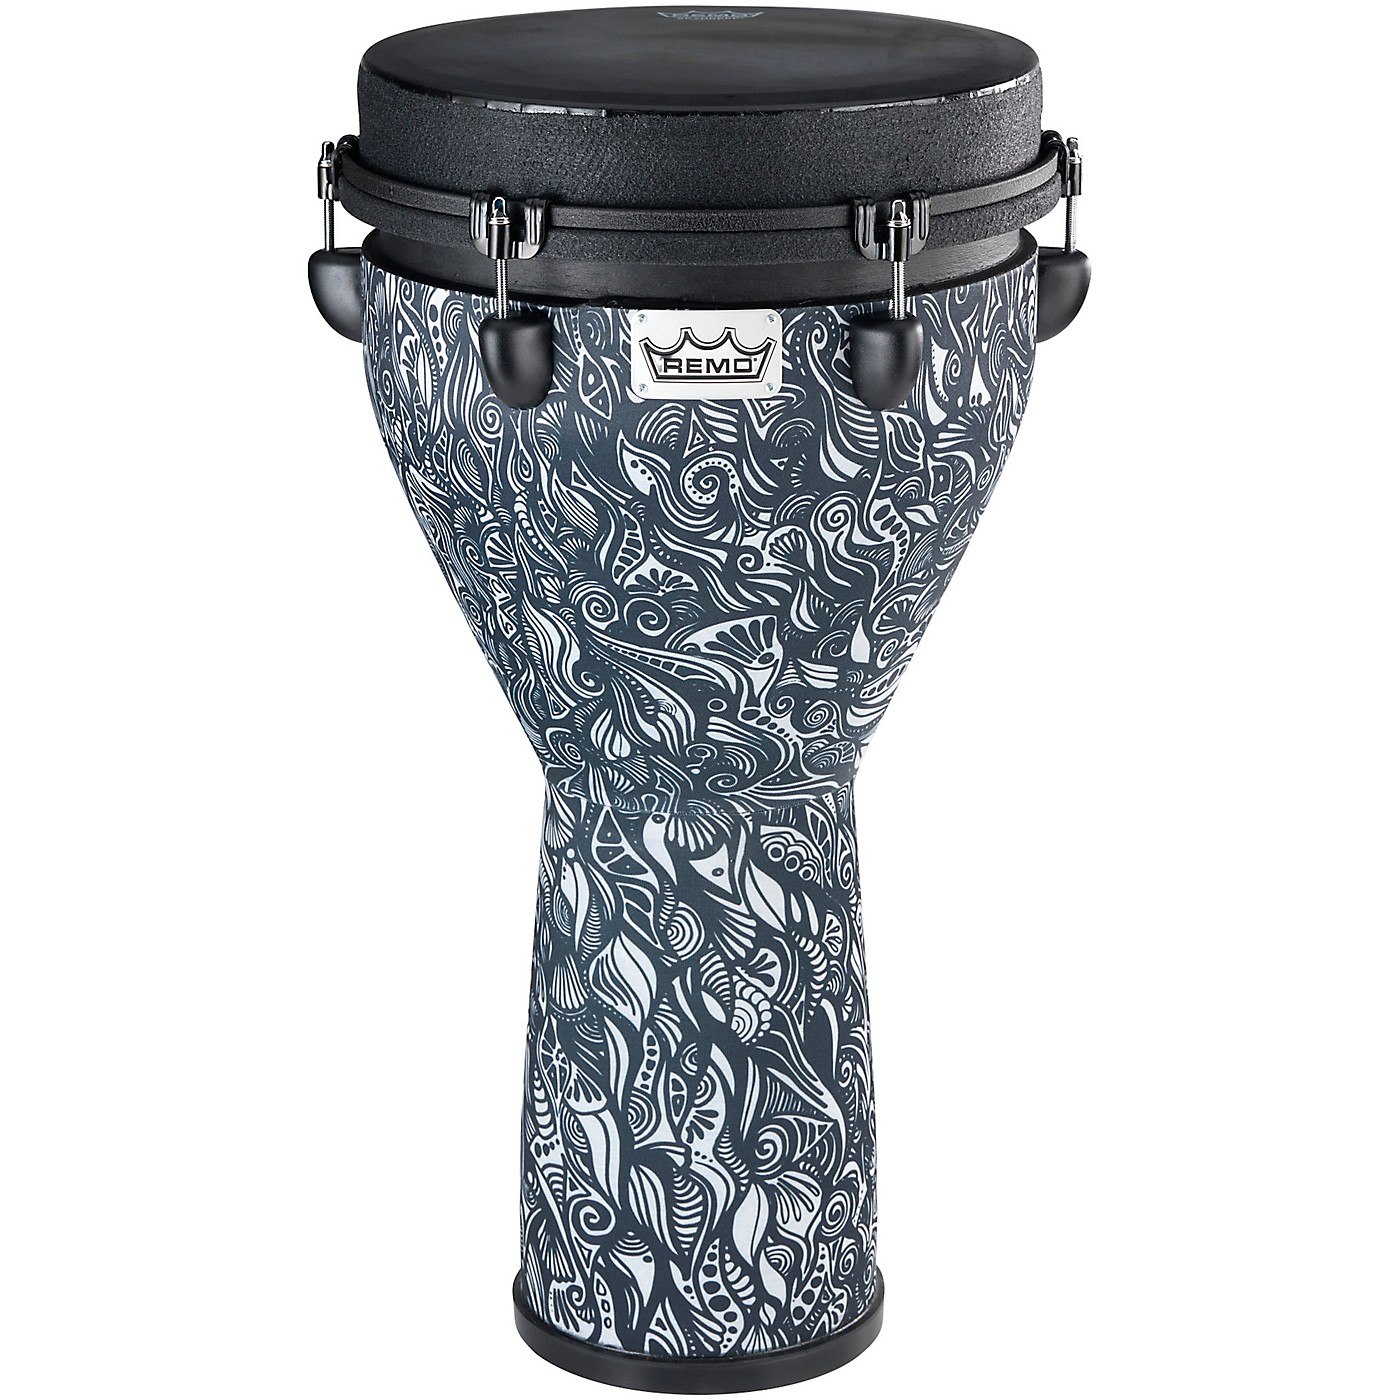 Remo ARTBEAT Artist Collection Aric Improta Aux Moon Djembe, 12